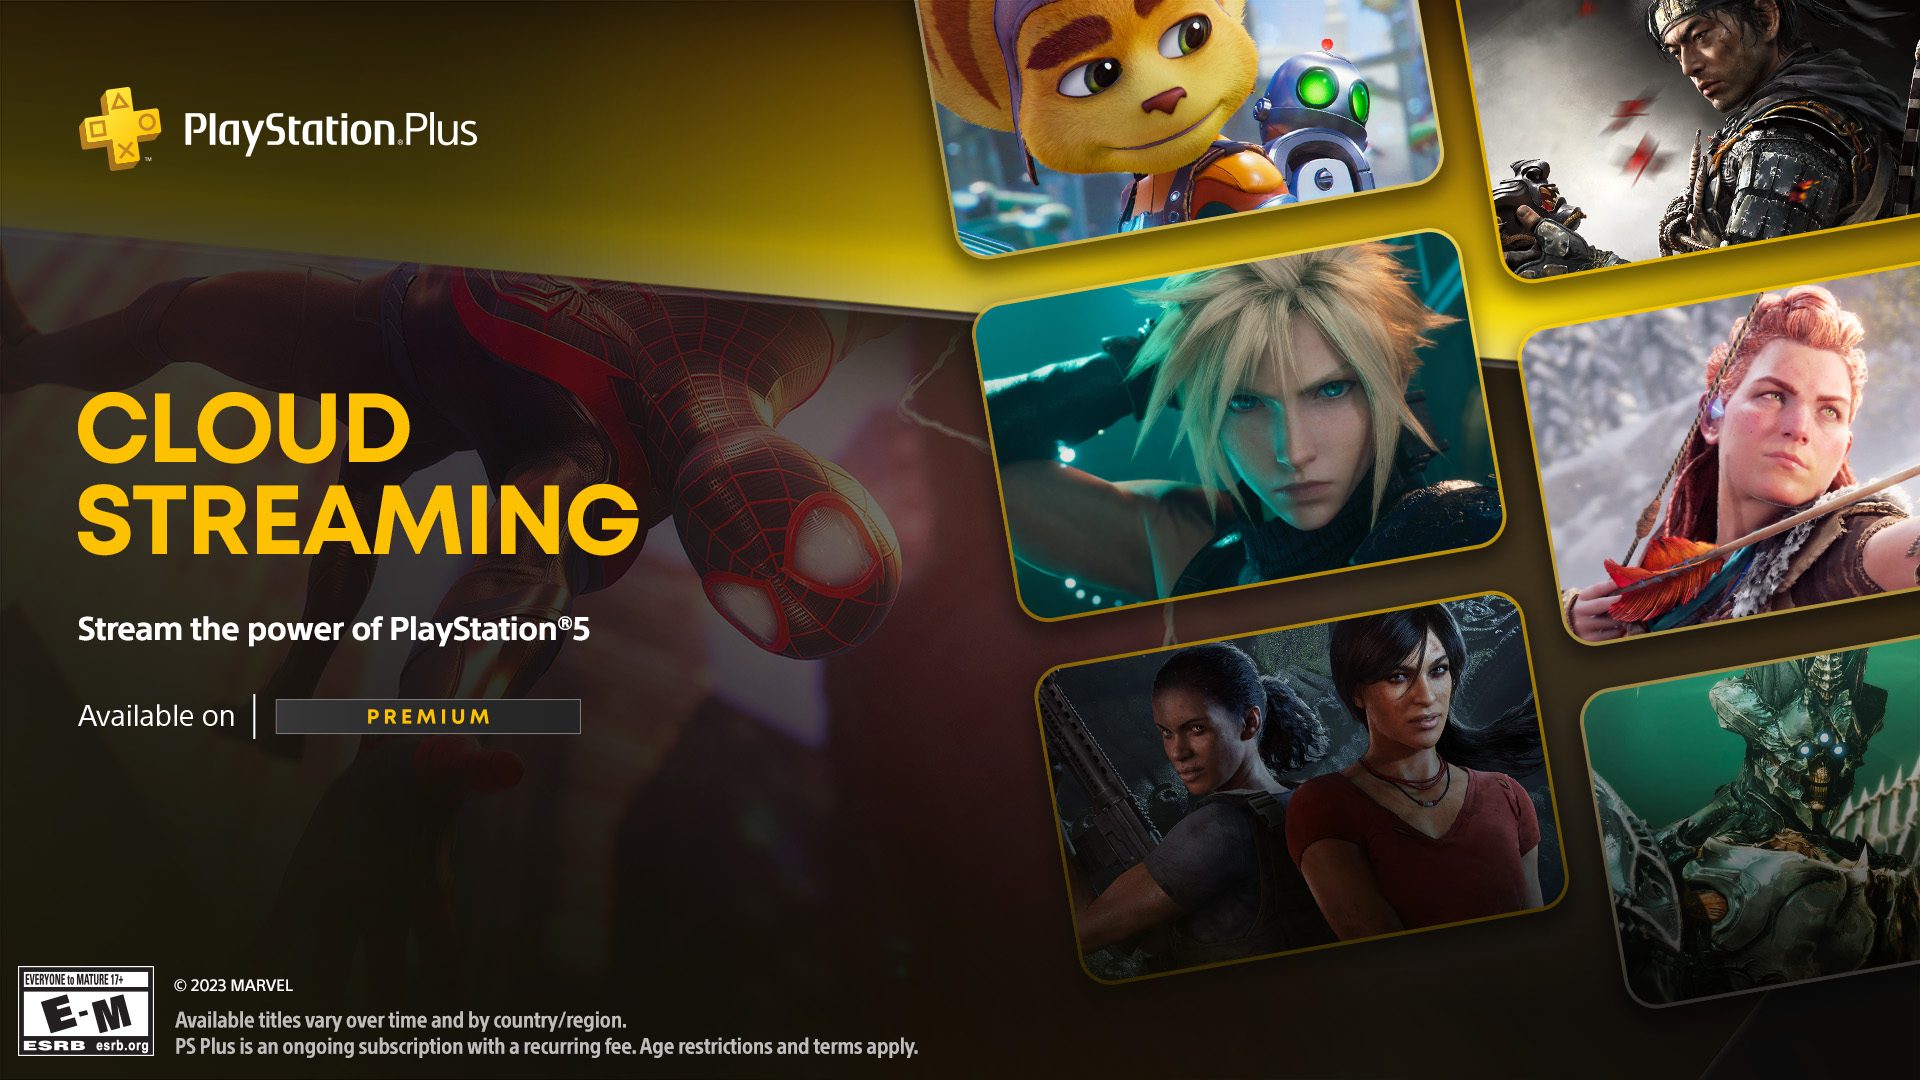 PS5 Streaming for PlayStation Plus Premium members launches starting today in Japan; Europe and North America to follow – PlayStation.Blog